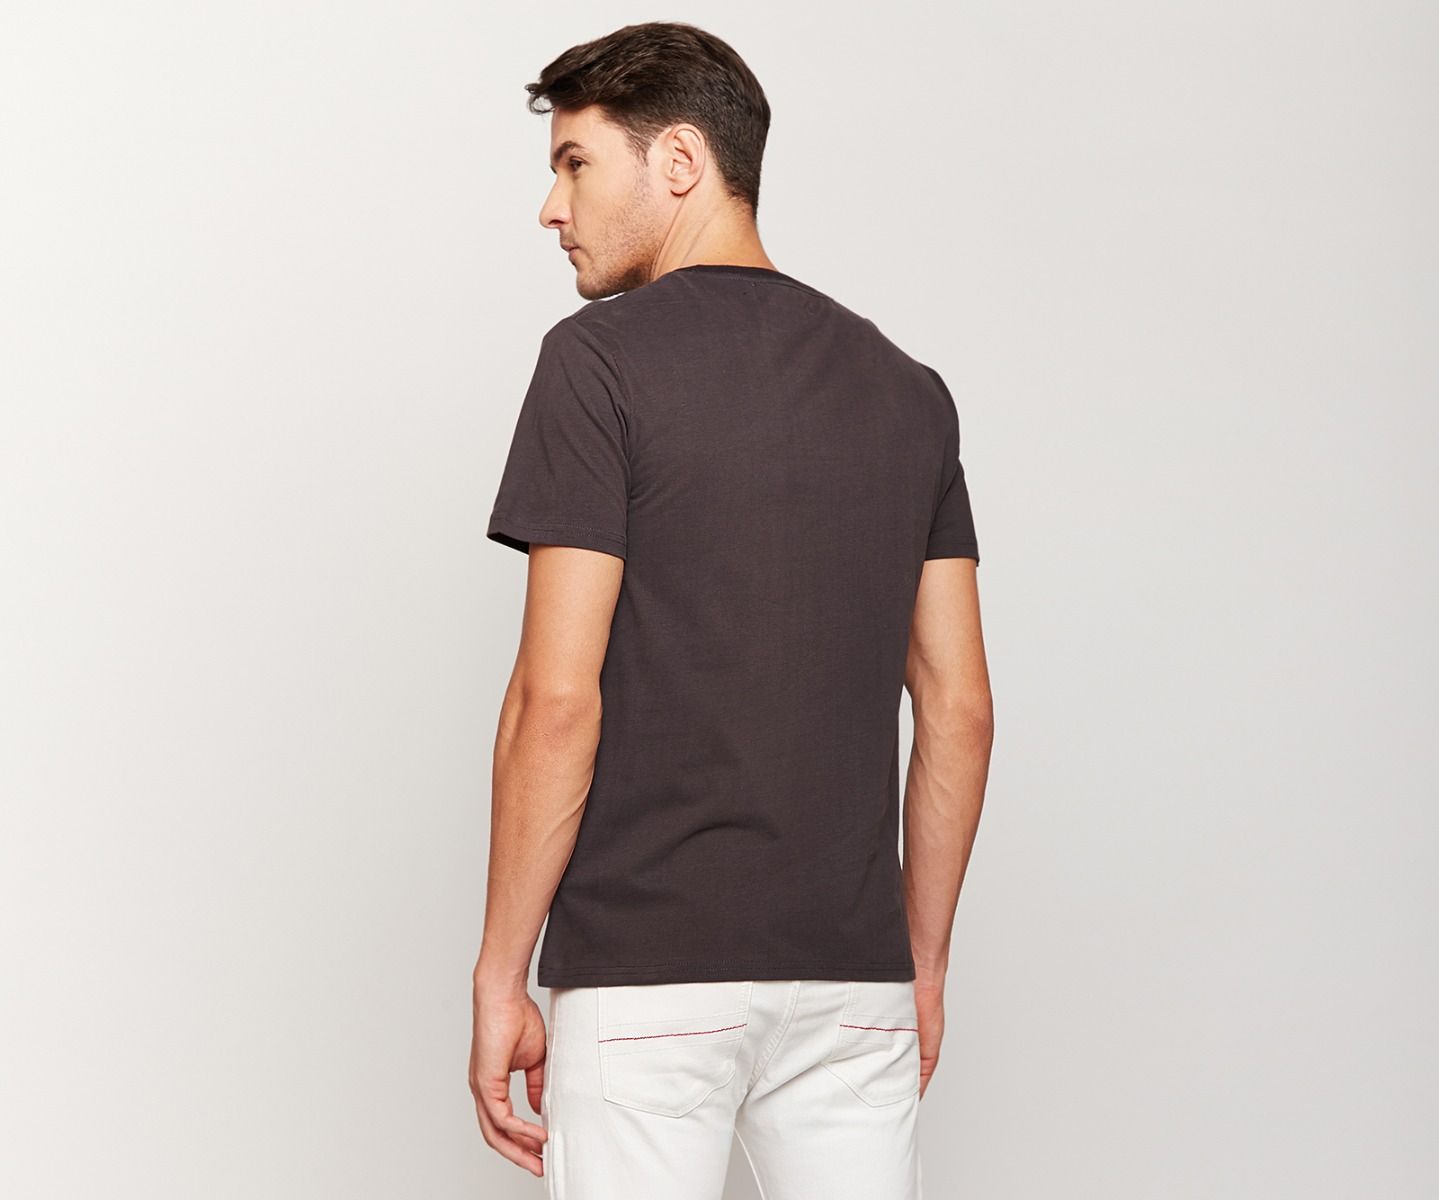 Washed Look Black Peach Finish T-shirt